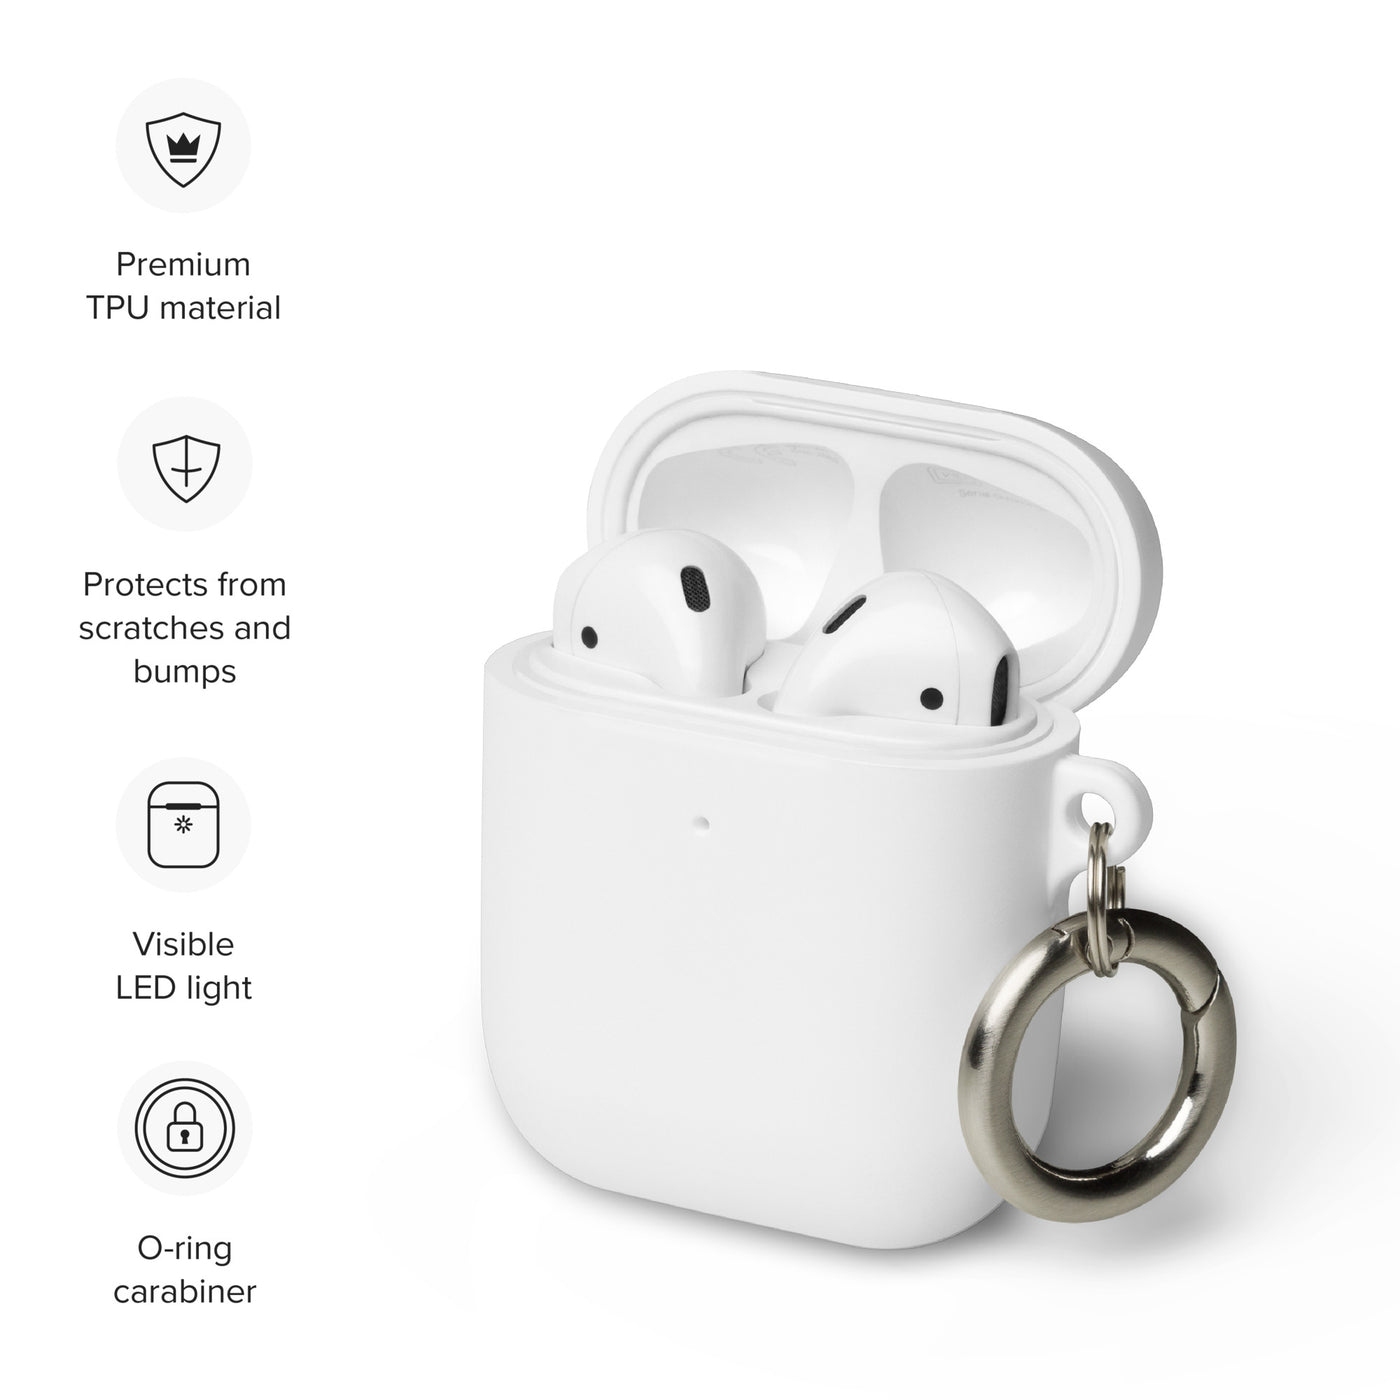 Long story short - Syn Ack Fin - AirPods case